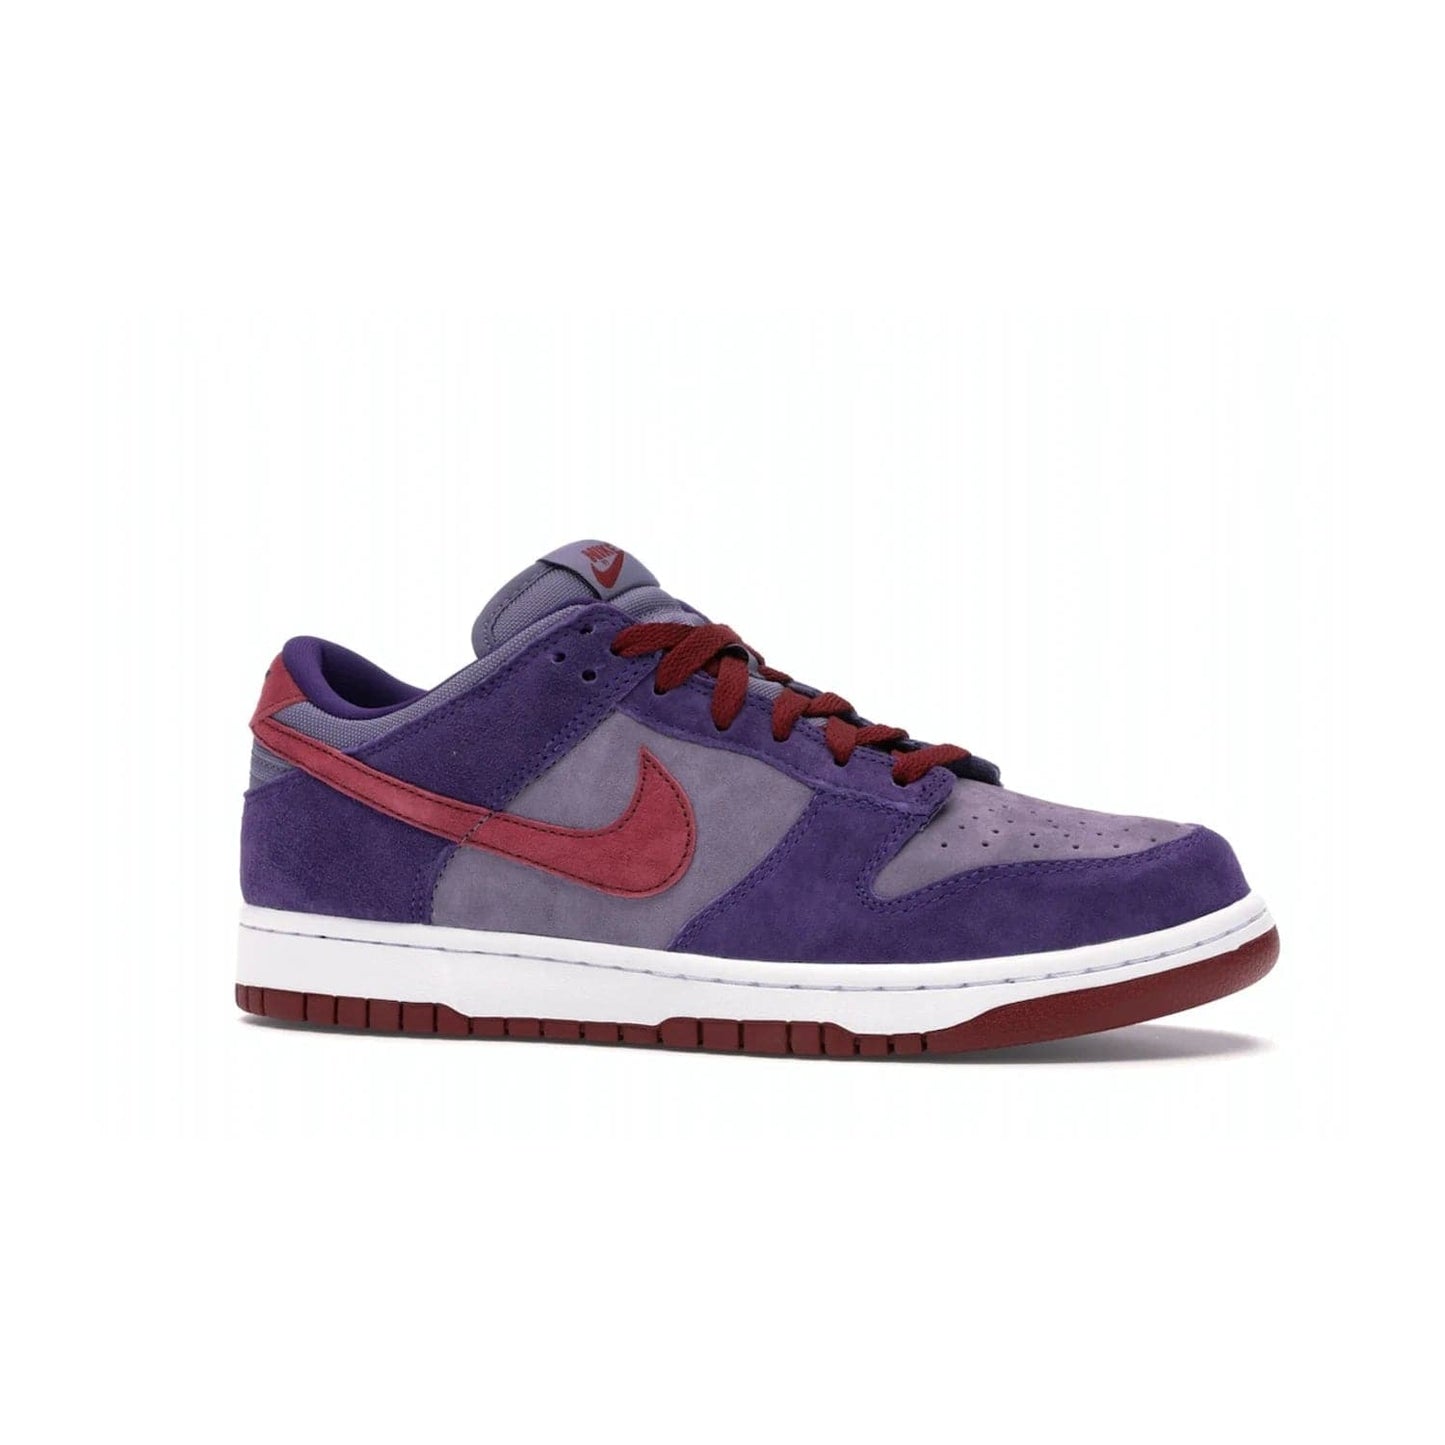 Nike Dunk Low Plum (2020) - Image 3 - Only at www.BallersClubKickz.com - Elevate your look with the Nike Dunk Low Plum (2020). Featuring a bold purple colorway, this retro-inspired silhouette is constructed of premium suede and makes for a must-have for any sneakerhead.